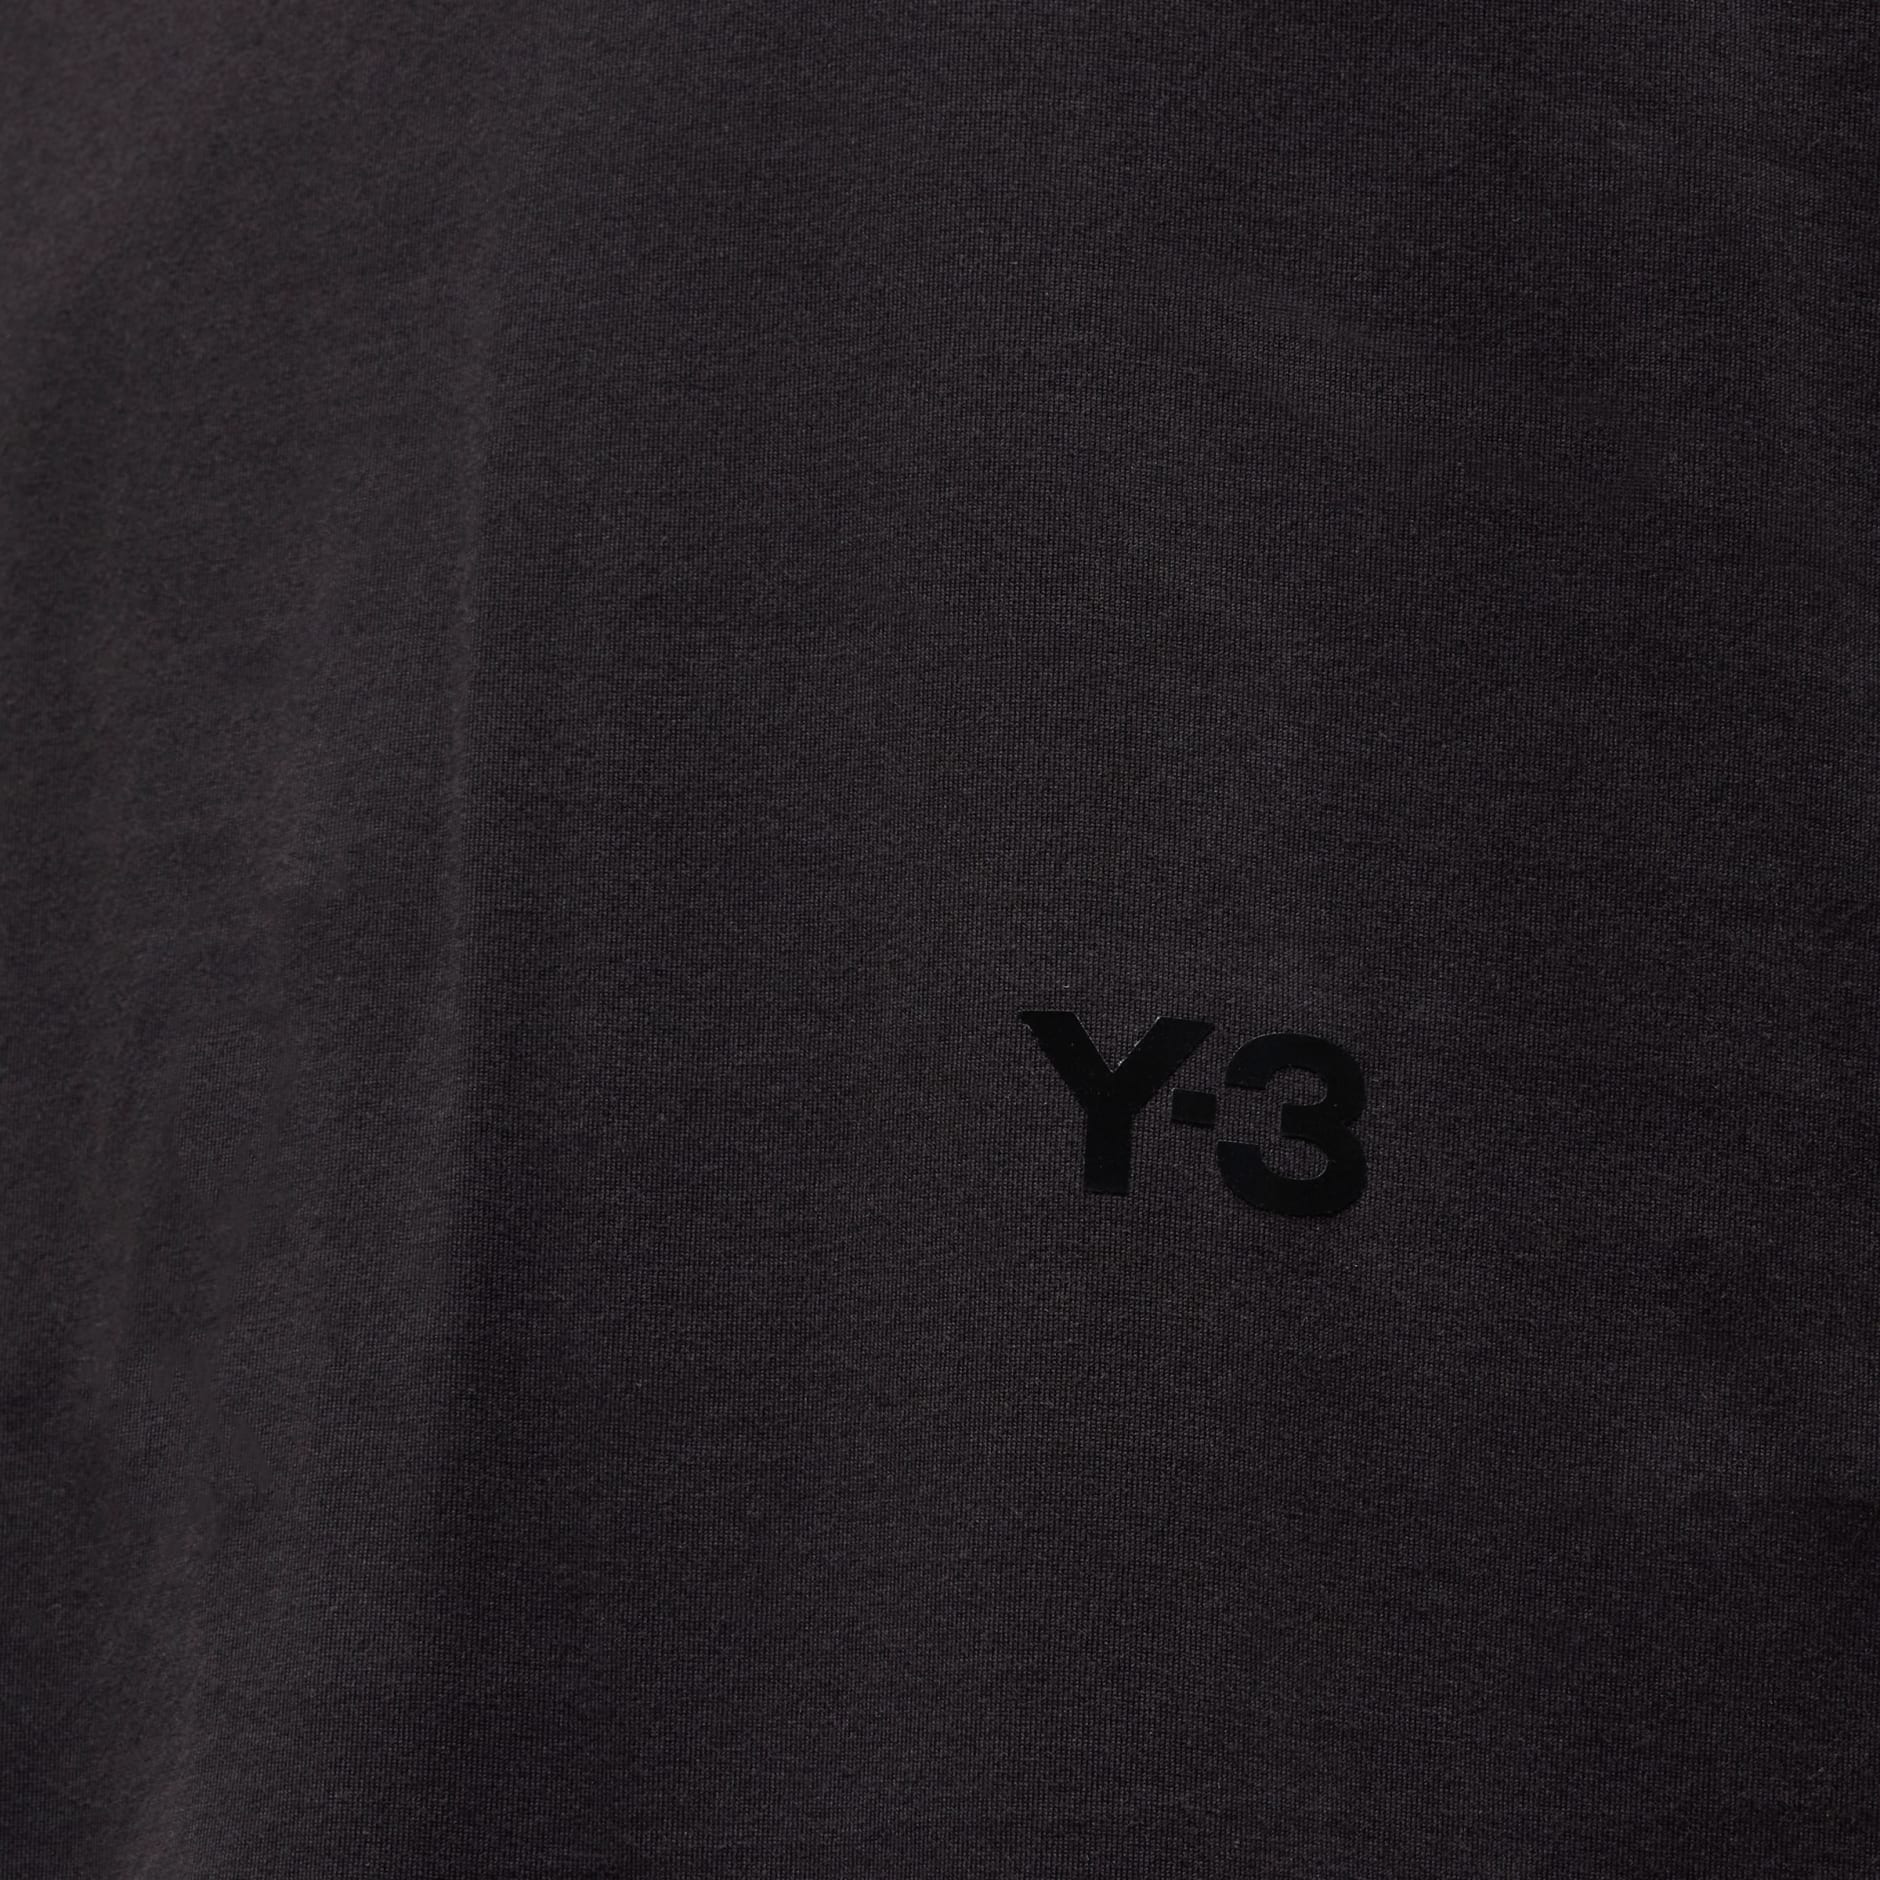 All products - Y-3 Boxy Short Sleeve Tee - Black | adidas South Africa